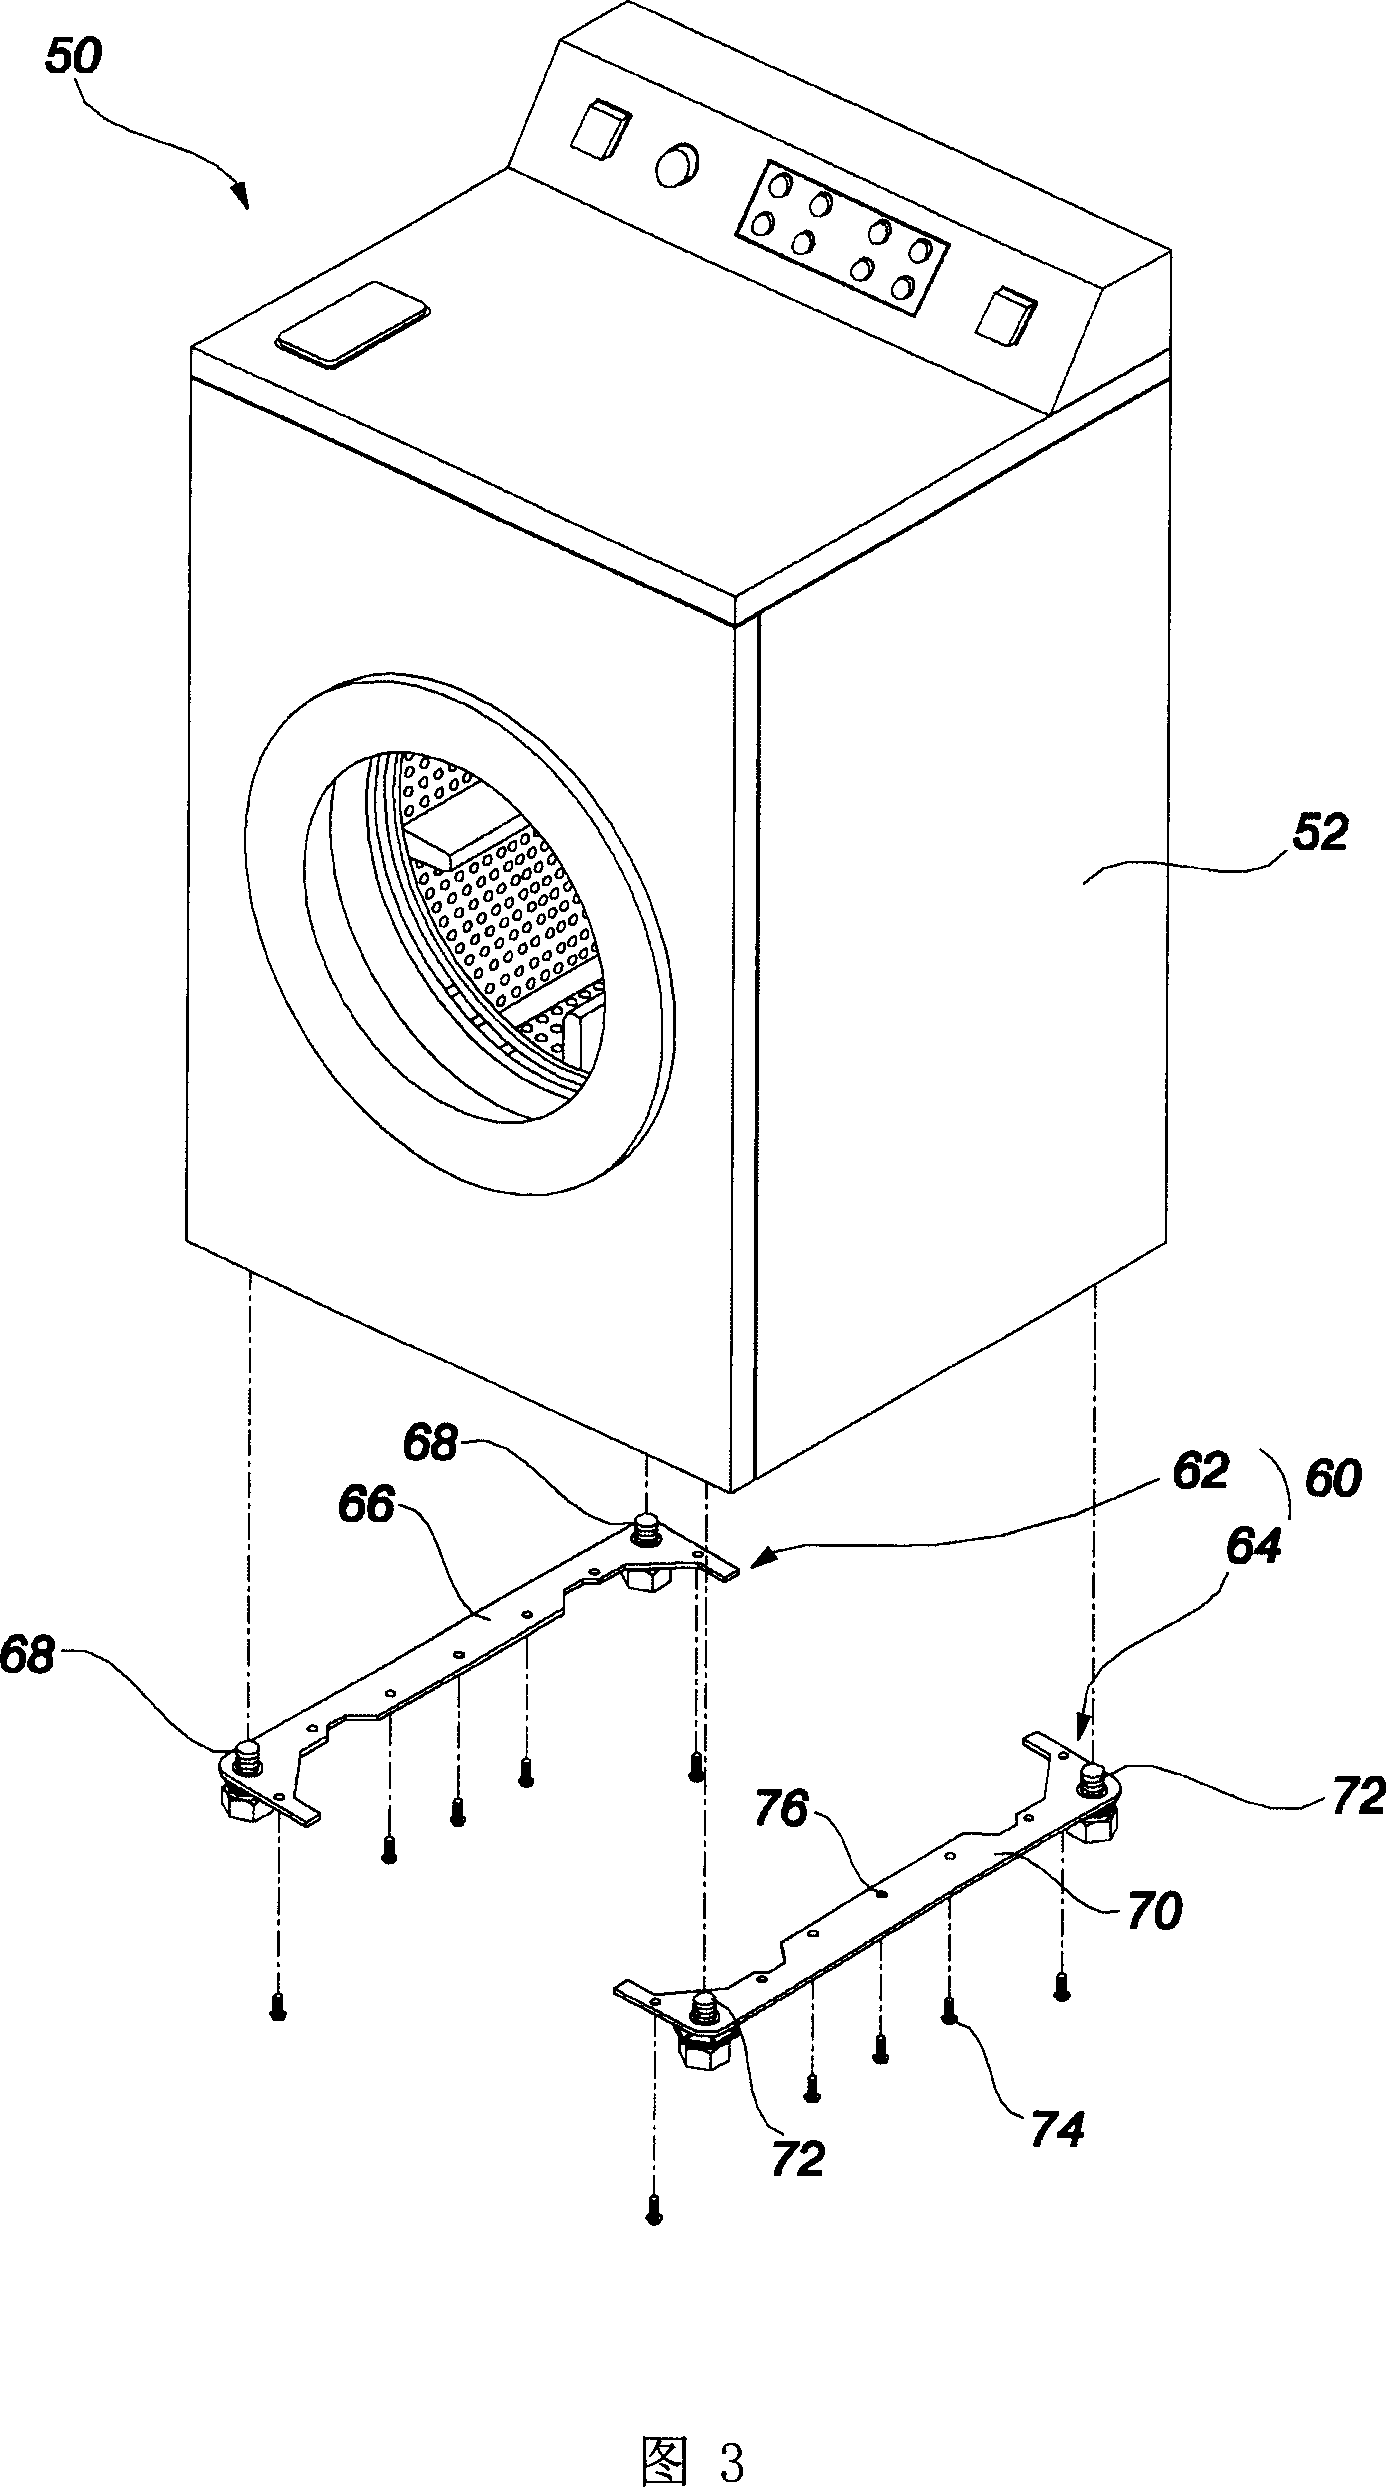 Mounting structure for bottom supports of washing machine